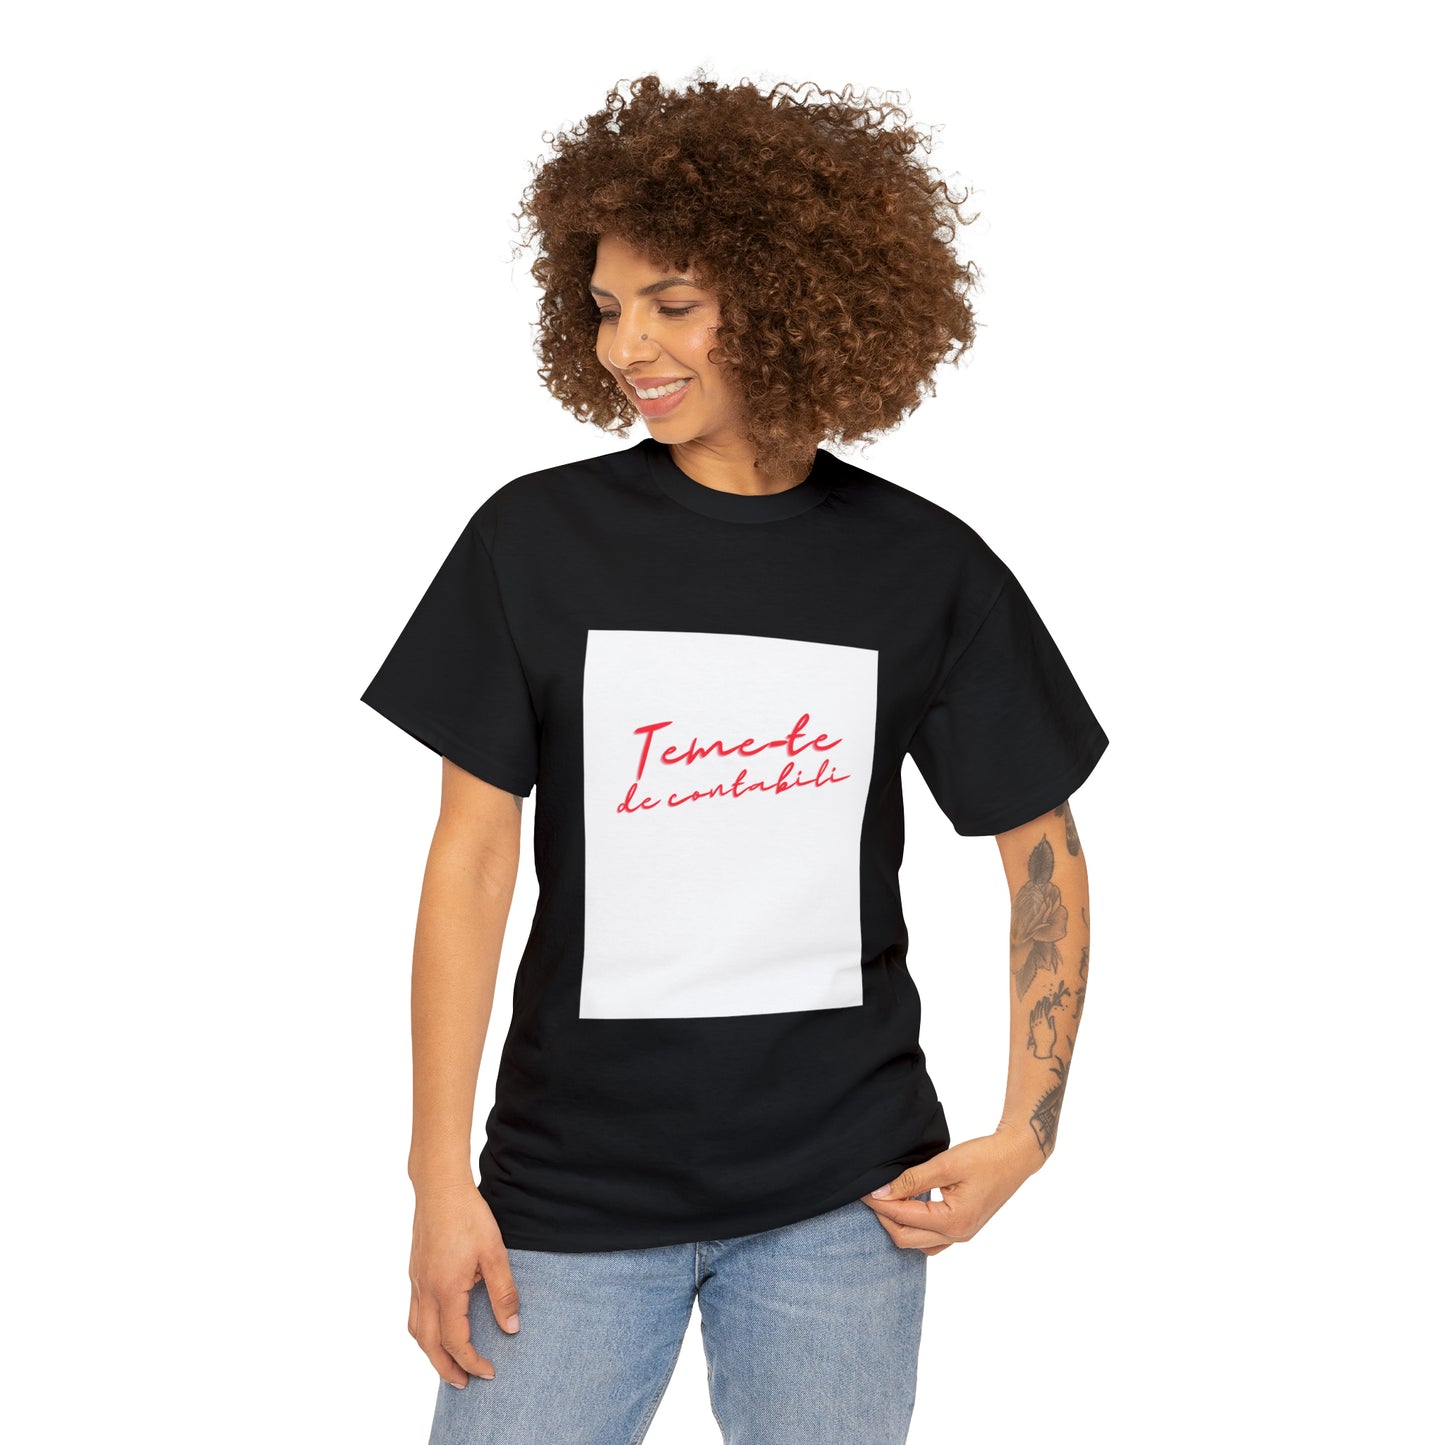 Tricoul unisex din bumbac gros